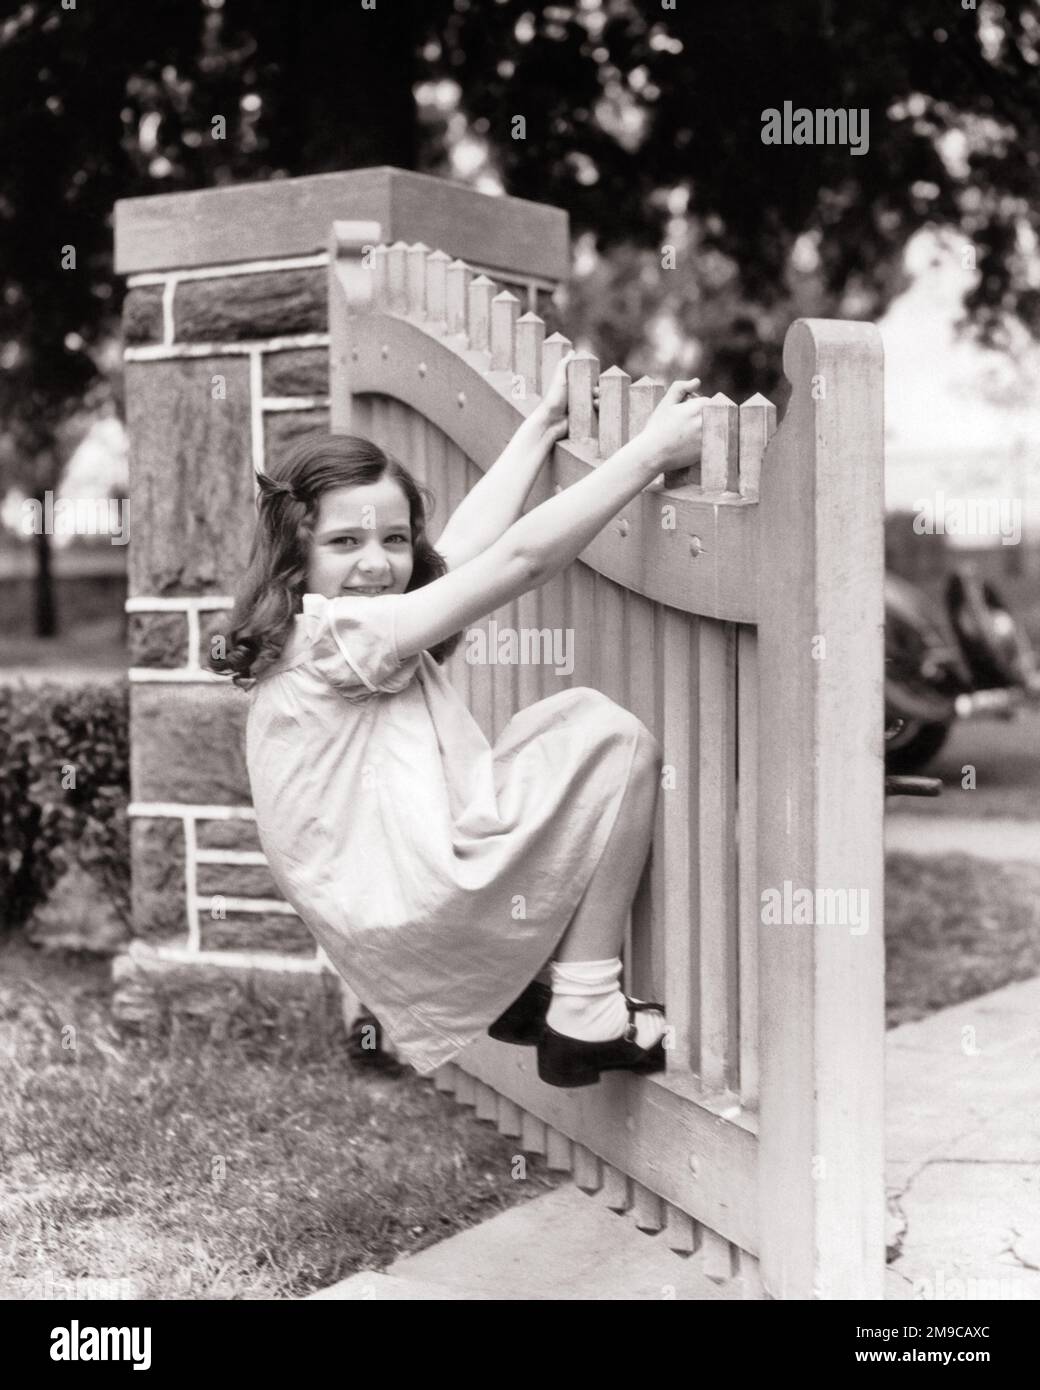 1930s SMILING BRUNETTE GIRL IN COTTON DRESS MARY JANE SHOES LOOKING AT CAMERA HANGING SWINGING ON PICKET FENCE GARDEN GATE - j547 HAR001 HARS B&W EYE CONTACT BRUNETTE GATE TEMPTATION HAPPINESS CHEERFUL ADVENTURE DISCOVERY LEISURE STRENGTH EXCITEMENT RECREATION INNOVATION PRIDE IN ON OPPORTUNITY SMILES SWINGING TOMBOY CONCEPTUAL IMAGINATION JOYFUL PICKET FENCE STYLISH COTTON DRESS GROWTH JUVENILES MARY JANE SHOES MISBEHAVING BLACK AND WHITE CAUCASIAN ETHNICITY HAR001 OLD FASHIONED Stock Photo